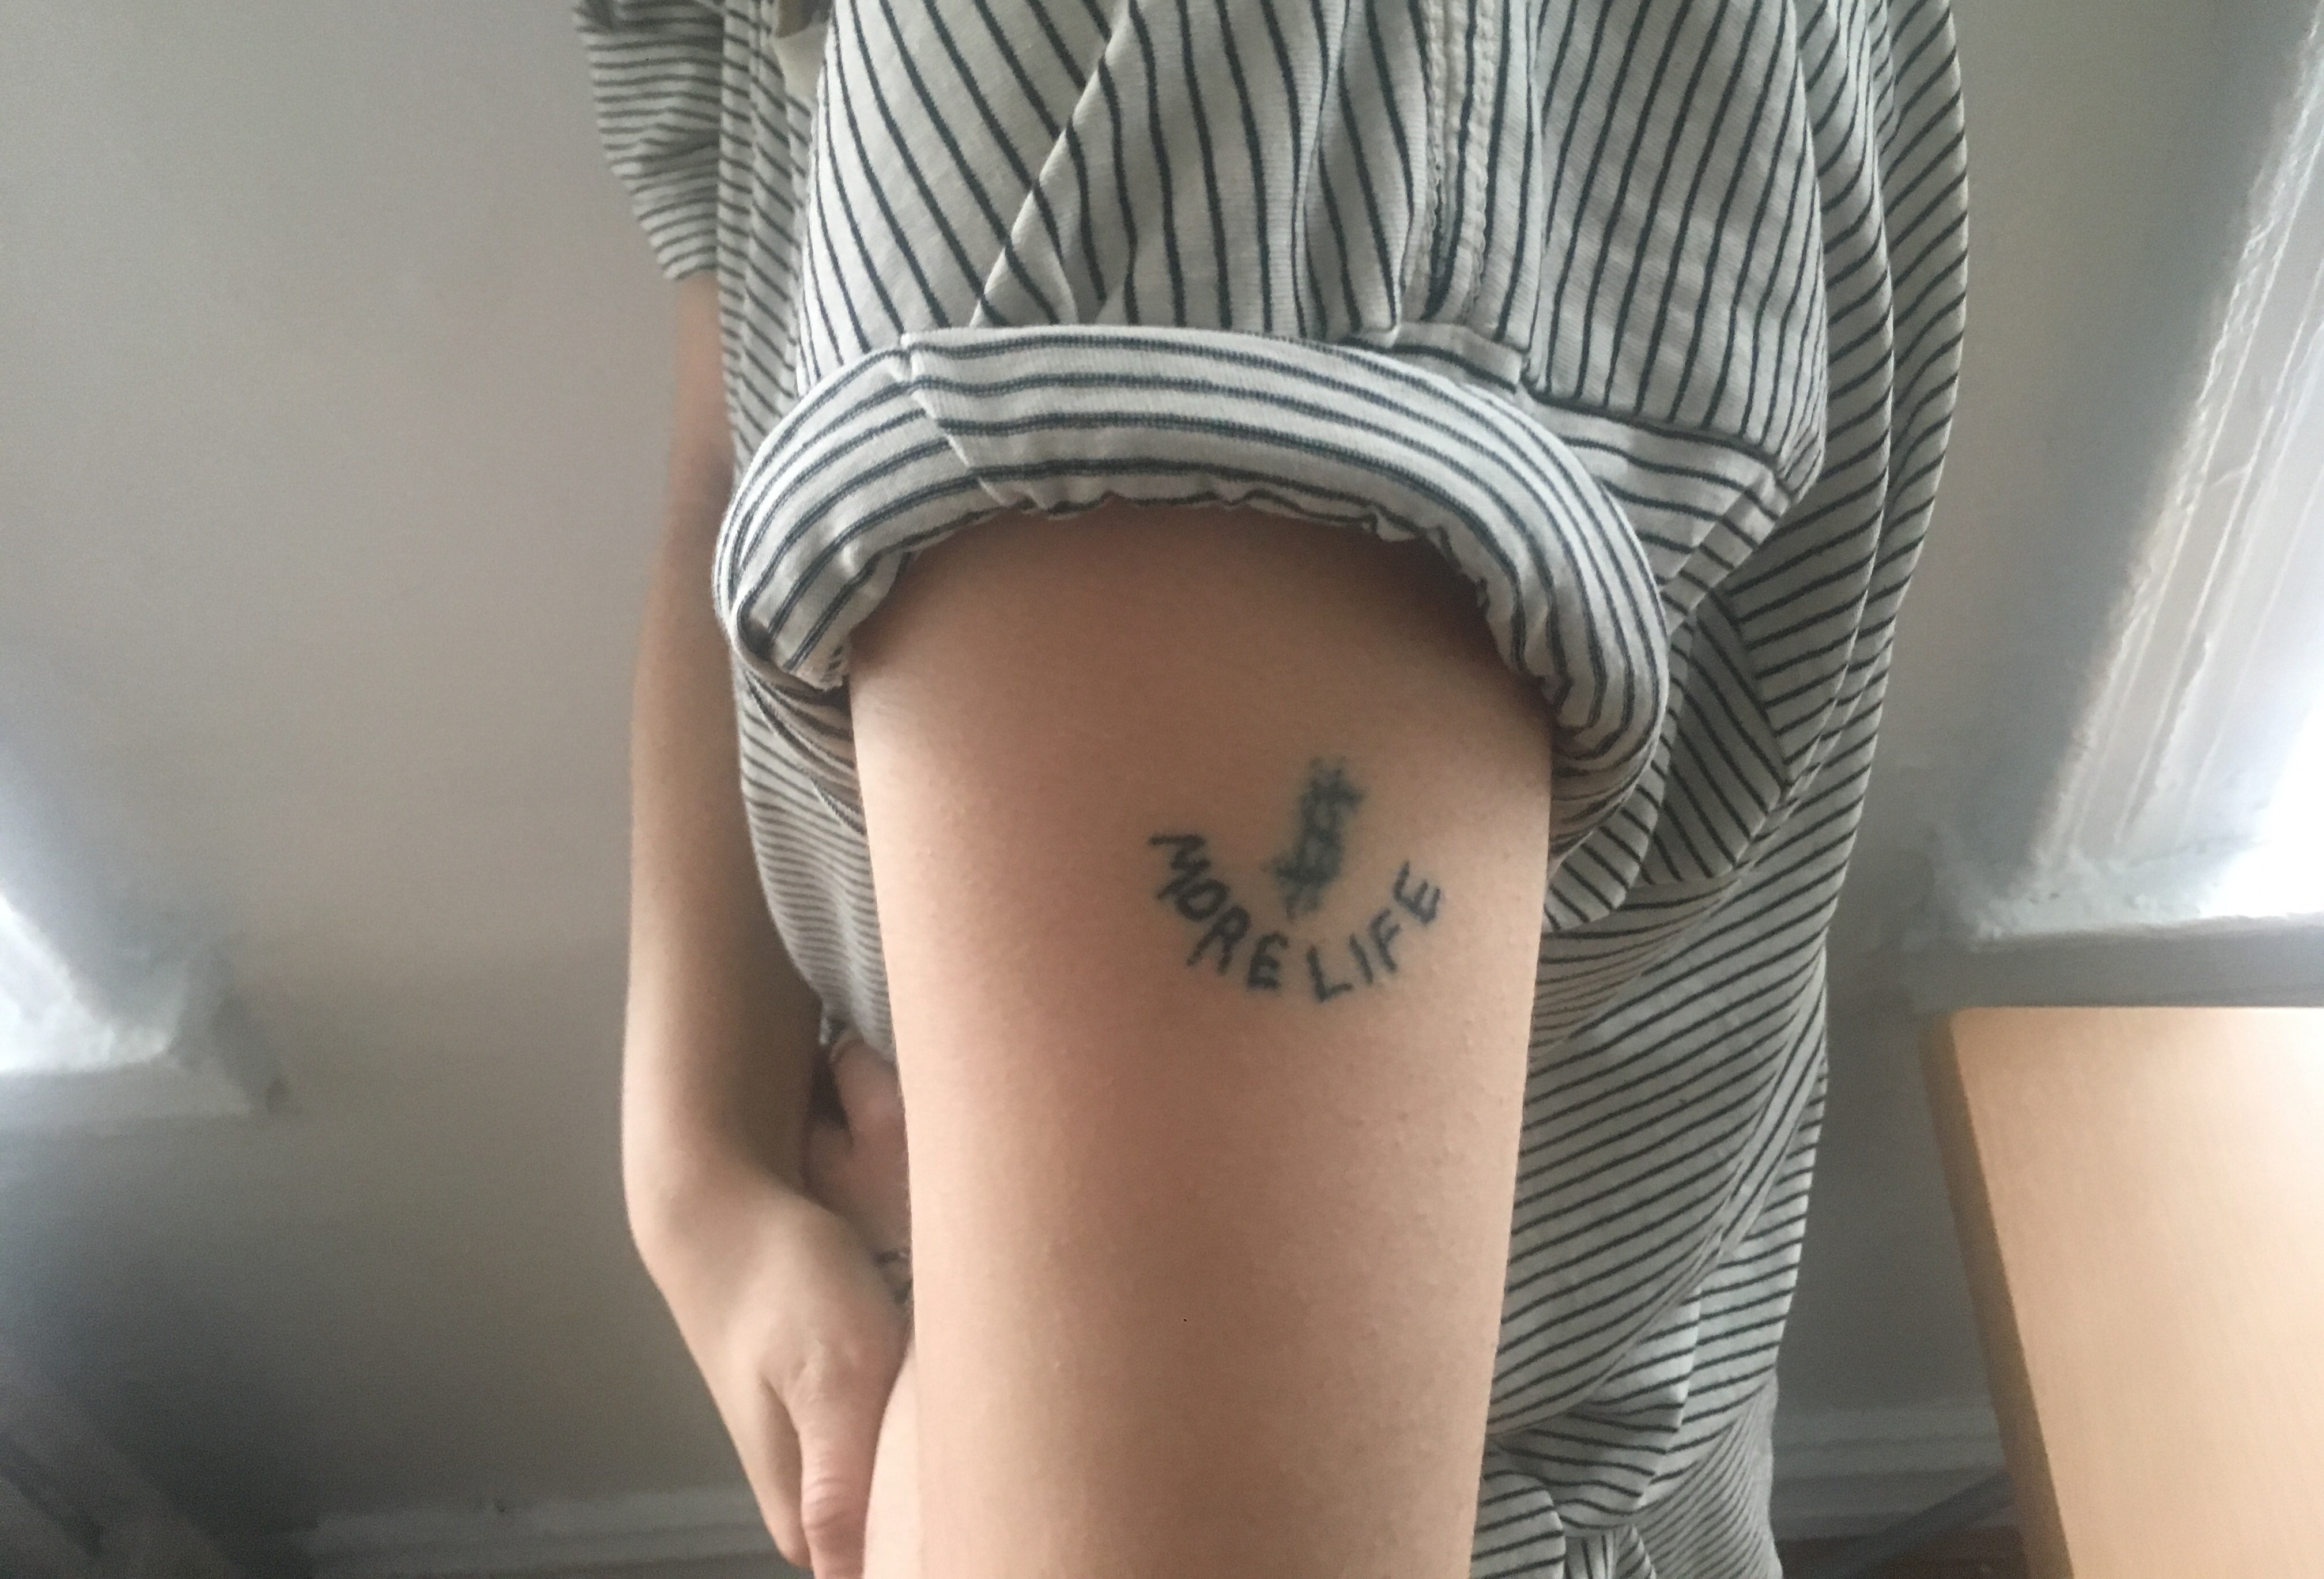 How Risky are Stick and Poke Tattoos